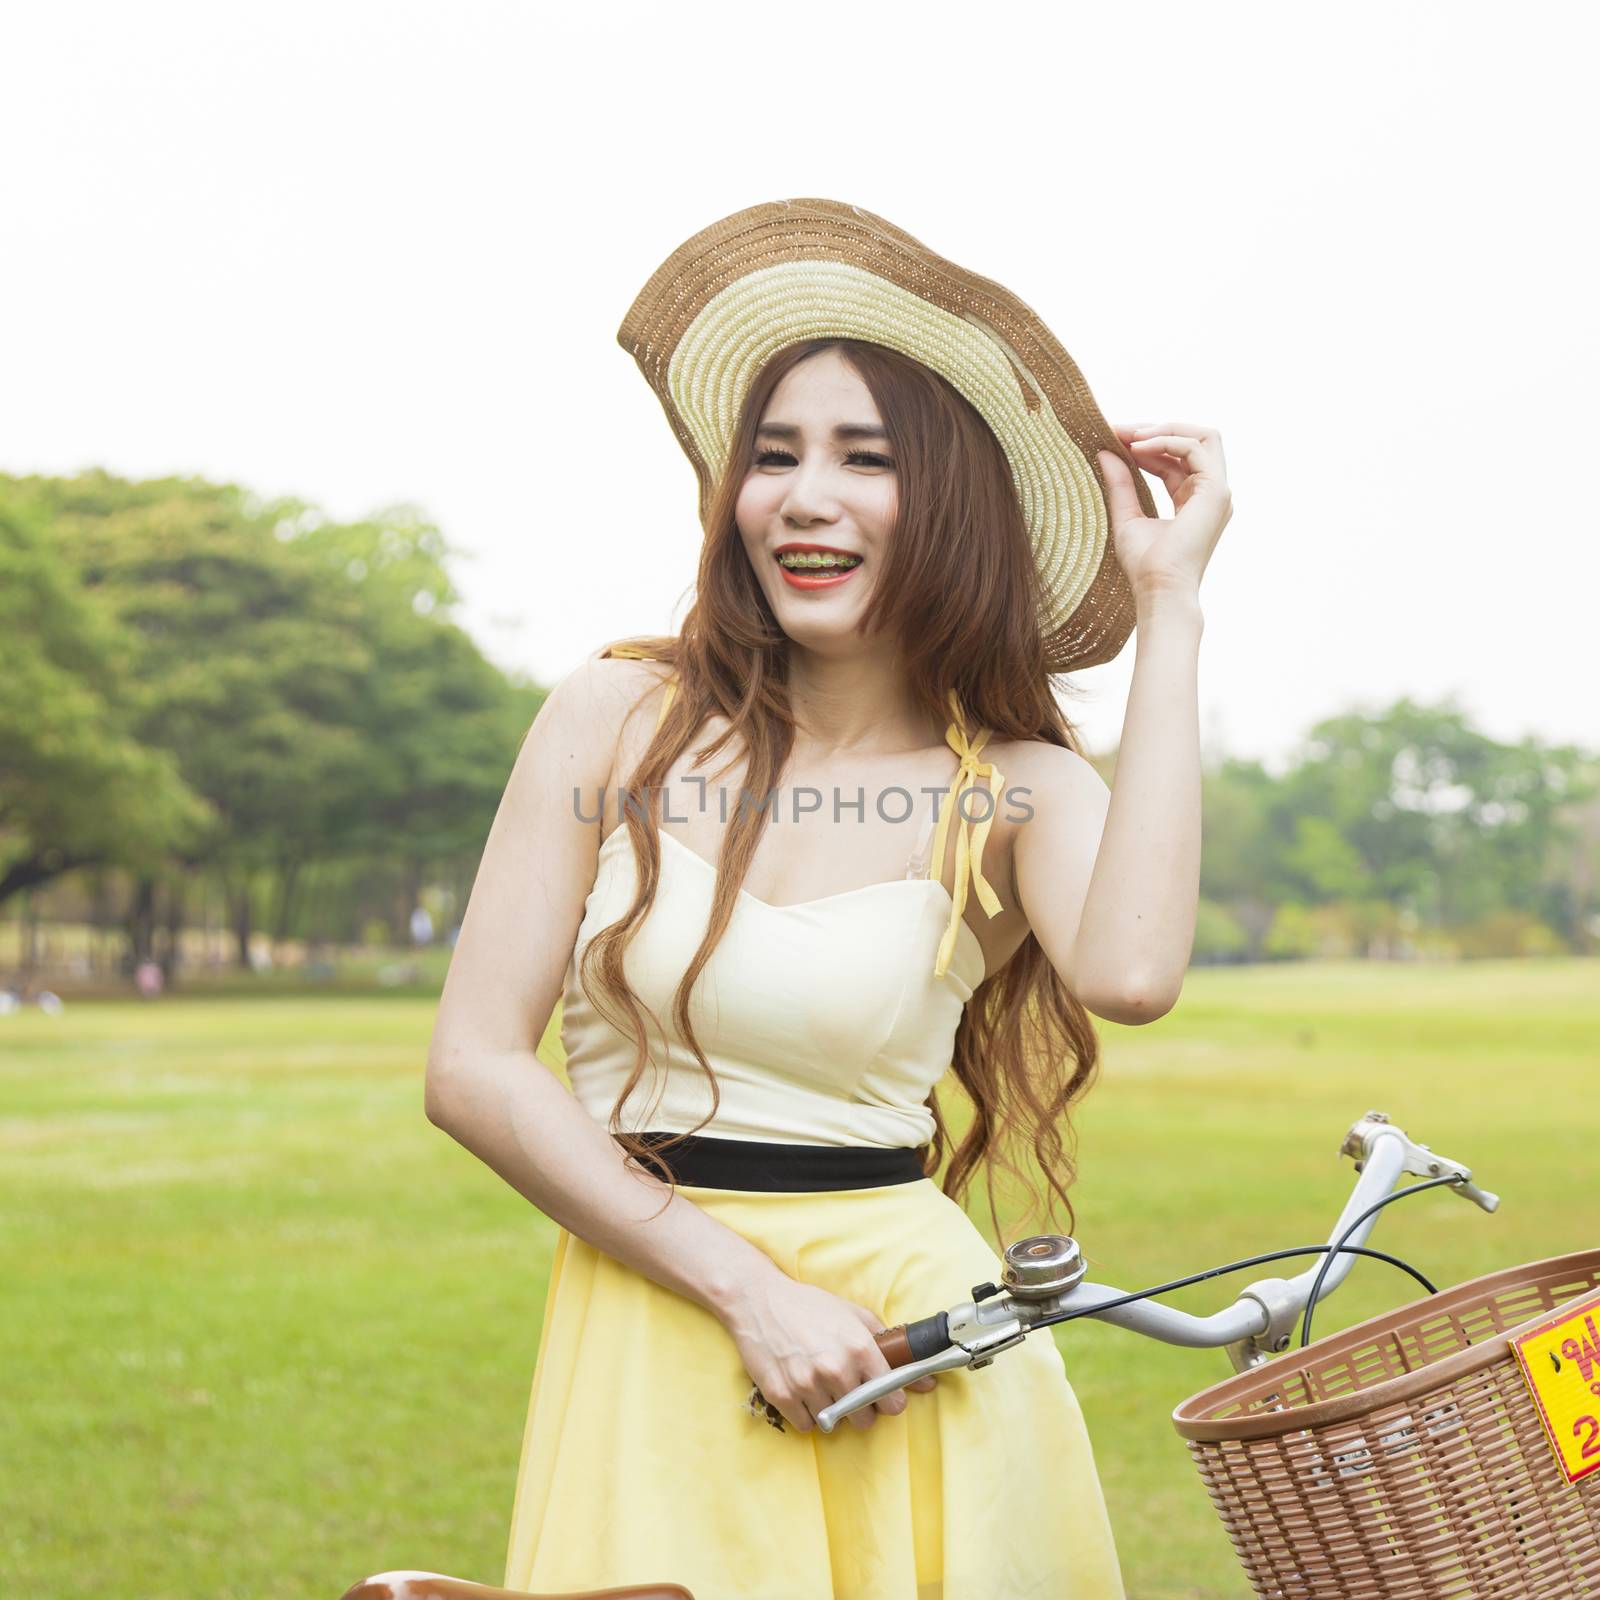 Woman with bike on the lawn. In the park on the lawn. With shady trees and natural